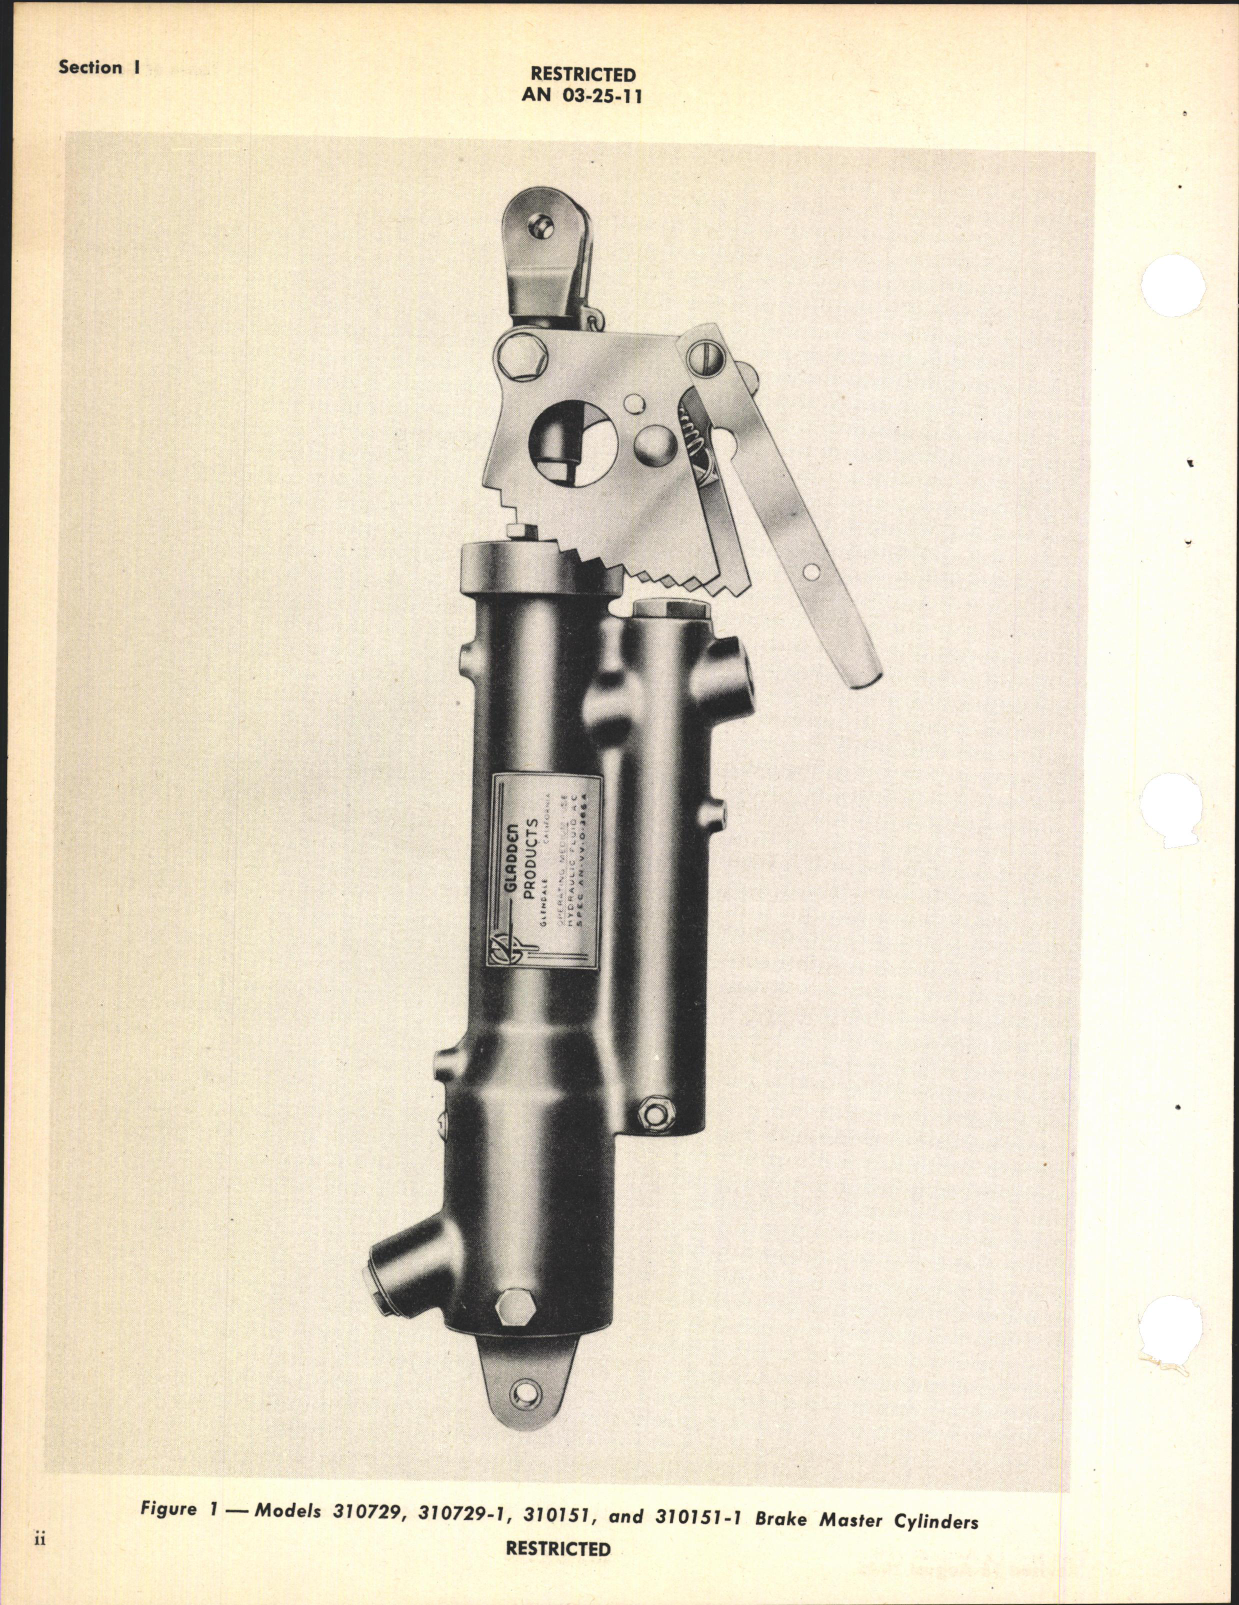 Sample page 6 from AirCorps Library document: Overhaul Instructions with Parts Catalog for Brake Master Cylinders